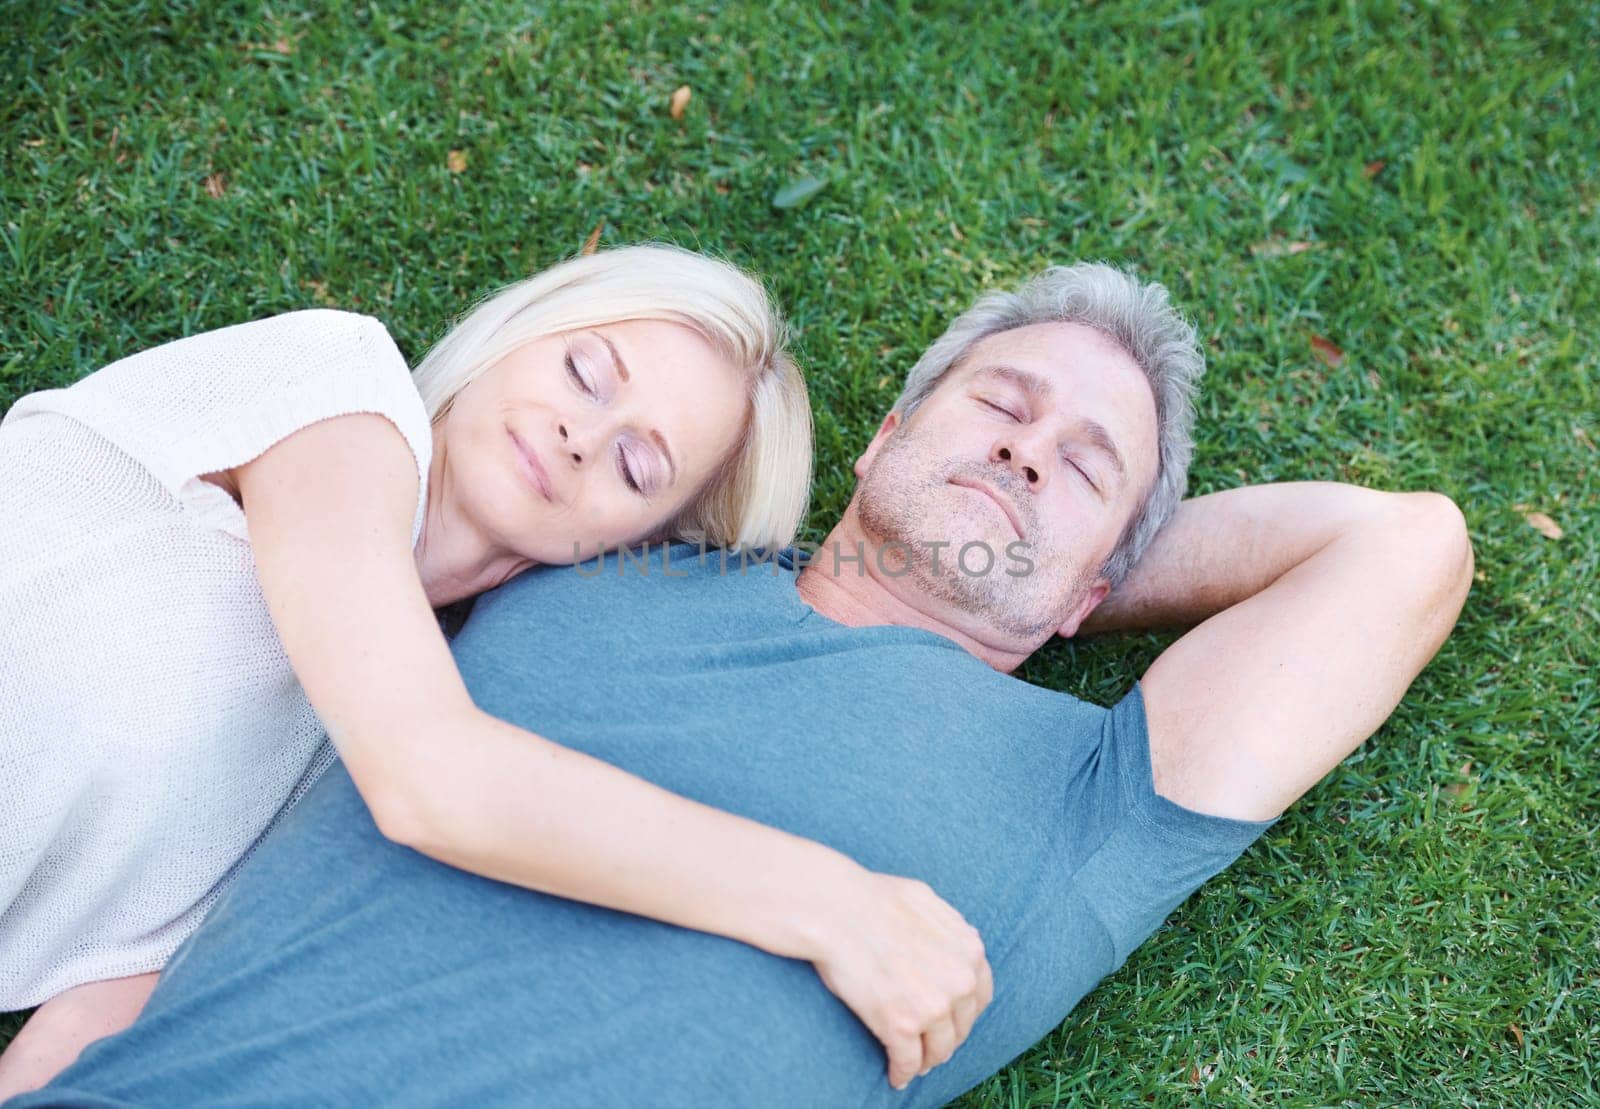 Happy couple, relax and sleeping on grass field with love for embrace, care or support in nature. Top view of man and woman asleep on lawn above with hug for cuddle or relaxation in outdoor romance.